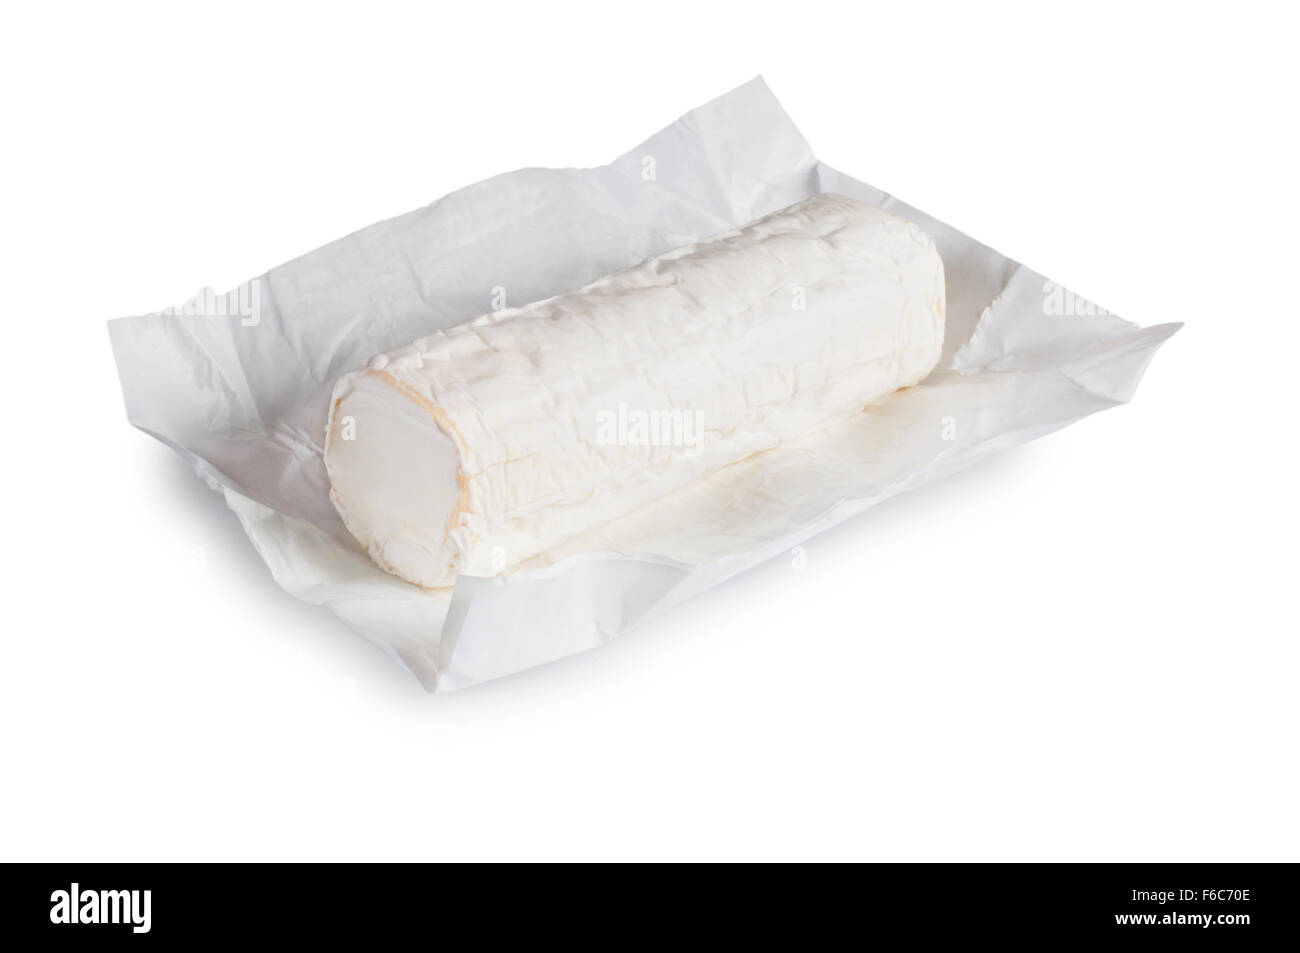 Unwrapped Goat's Cheese Stock Photo